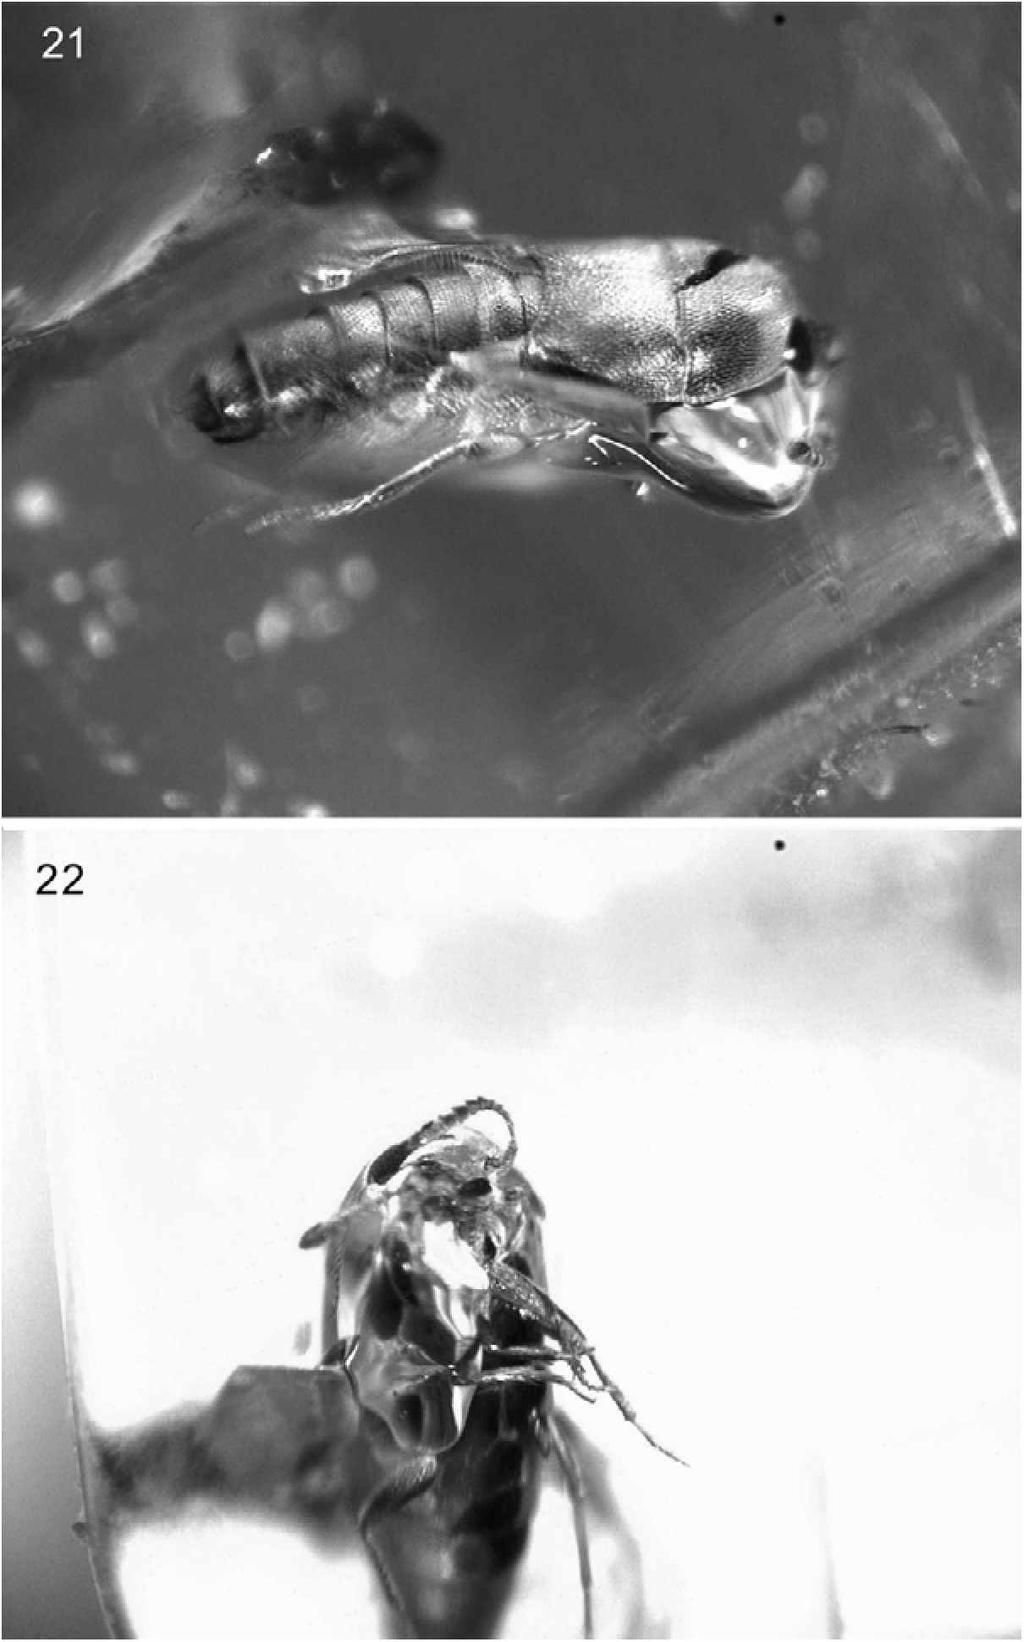 Figs 21-22: Dictyon antiquus sp.n. 21 - habitus in lateral view; 22 - habitus in ventral view.